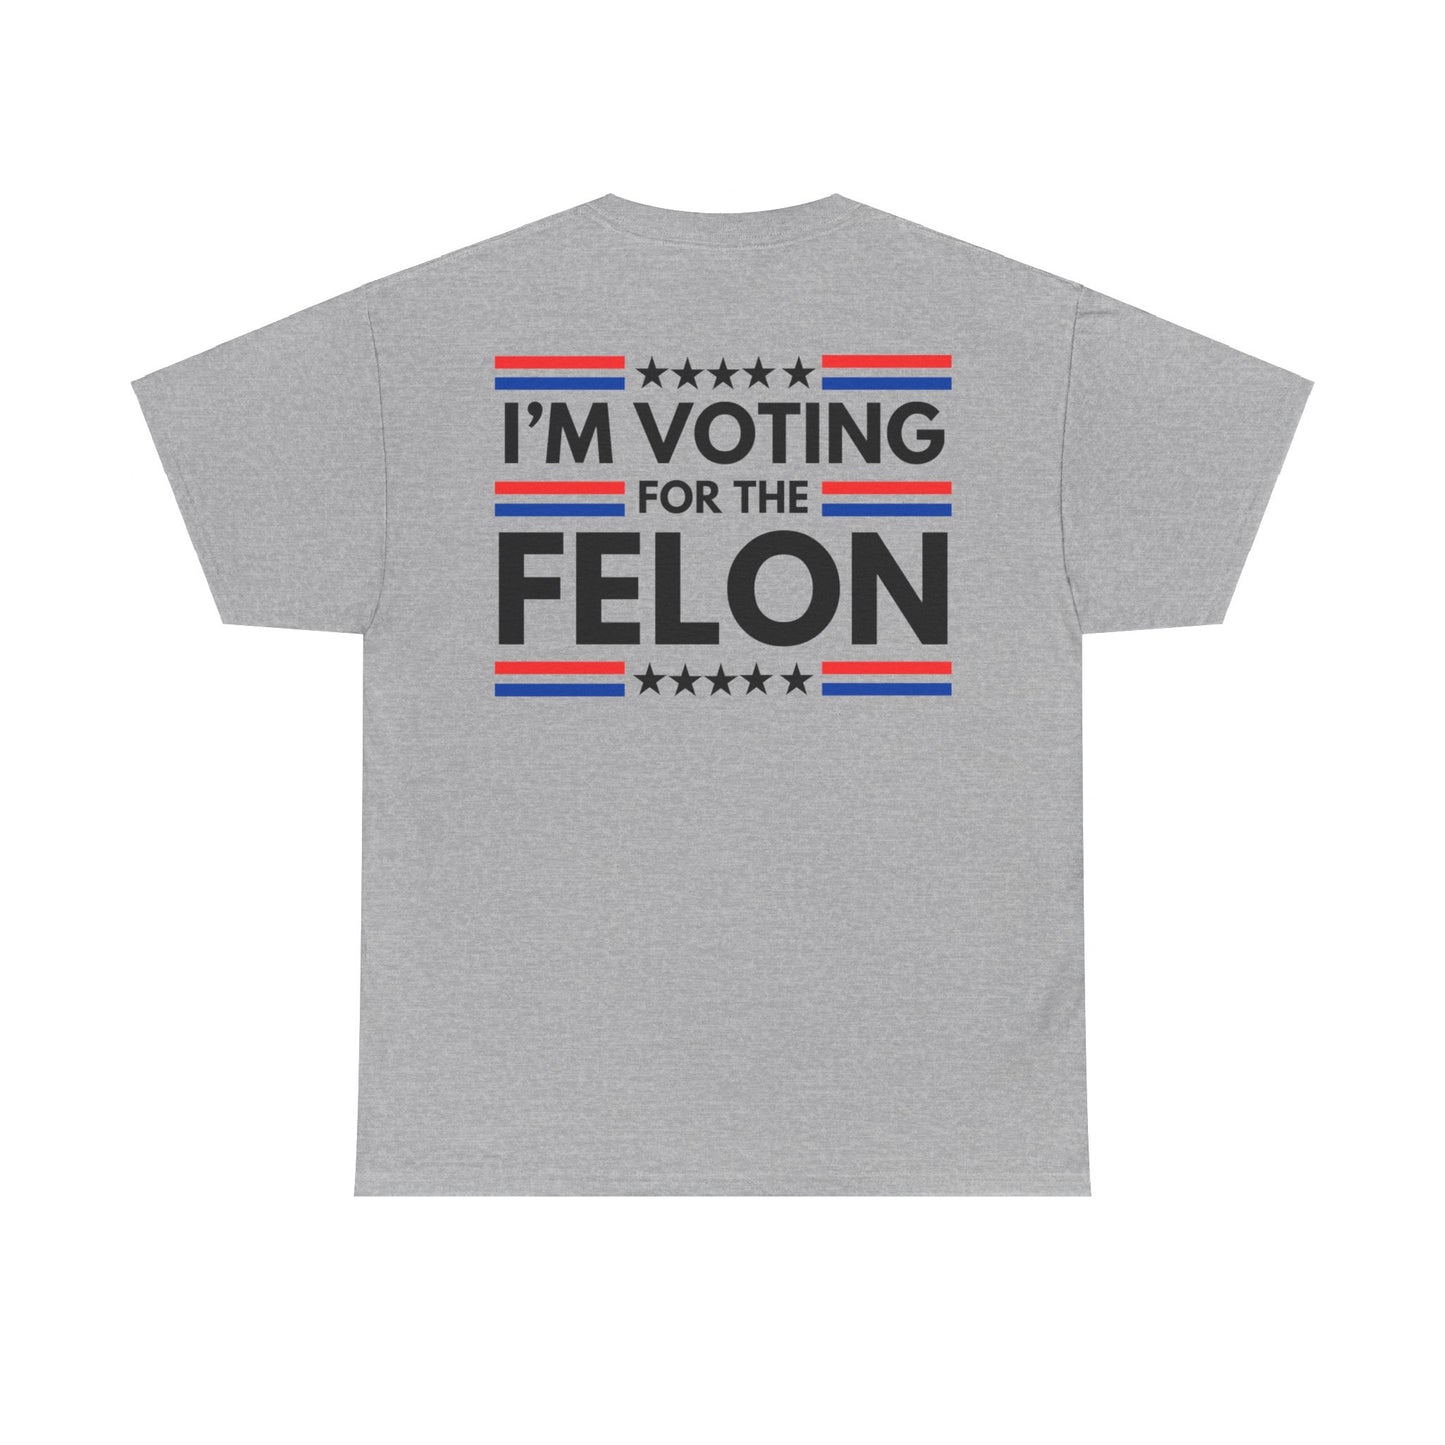 Get trendy with I'm Voting for the Felon Trump 47 (black Stars) Unisex Heavy Cotton Tee - T-Shirt available at Good Gift Company. Grab yours for $16.97 today!